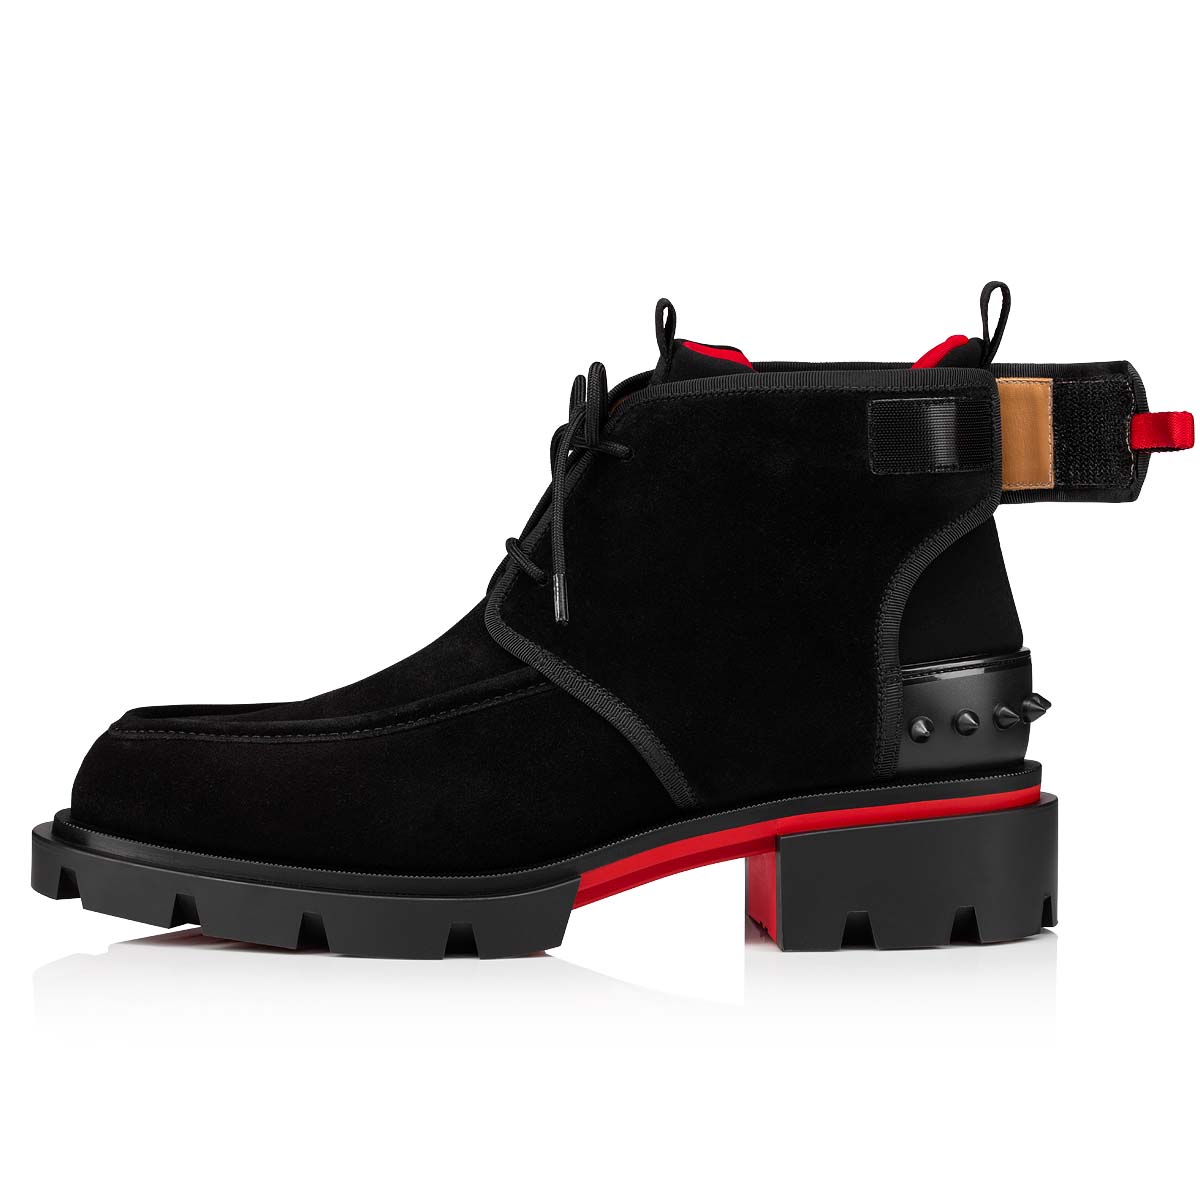 Our Georges II - Ankle boots - Calf leather - Black - Christian 